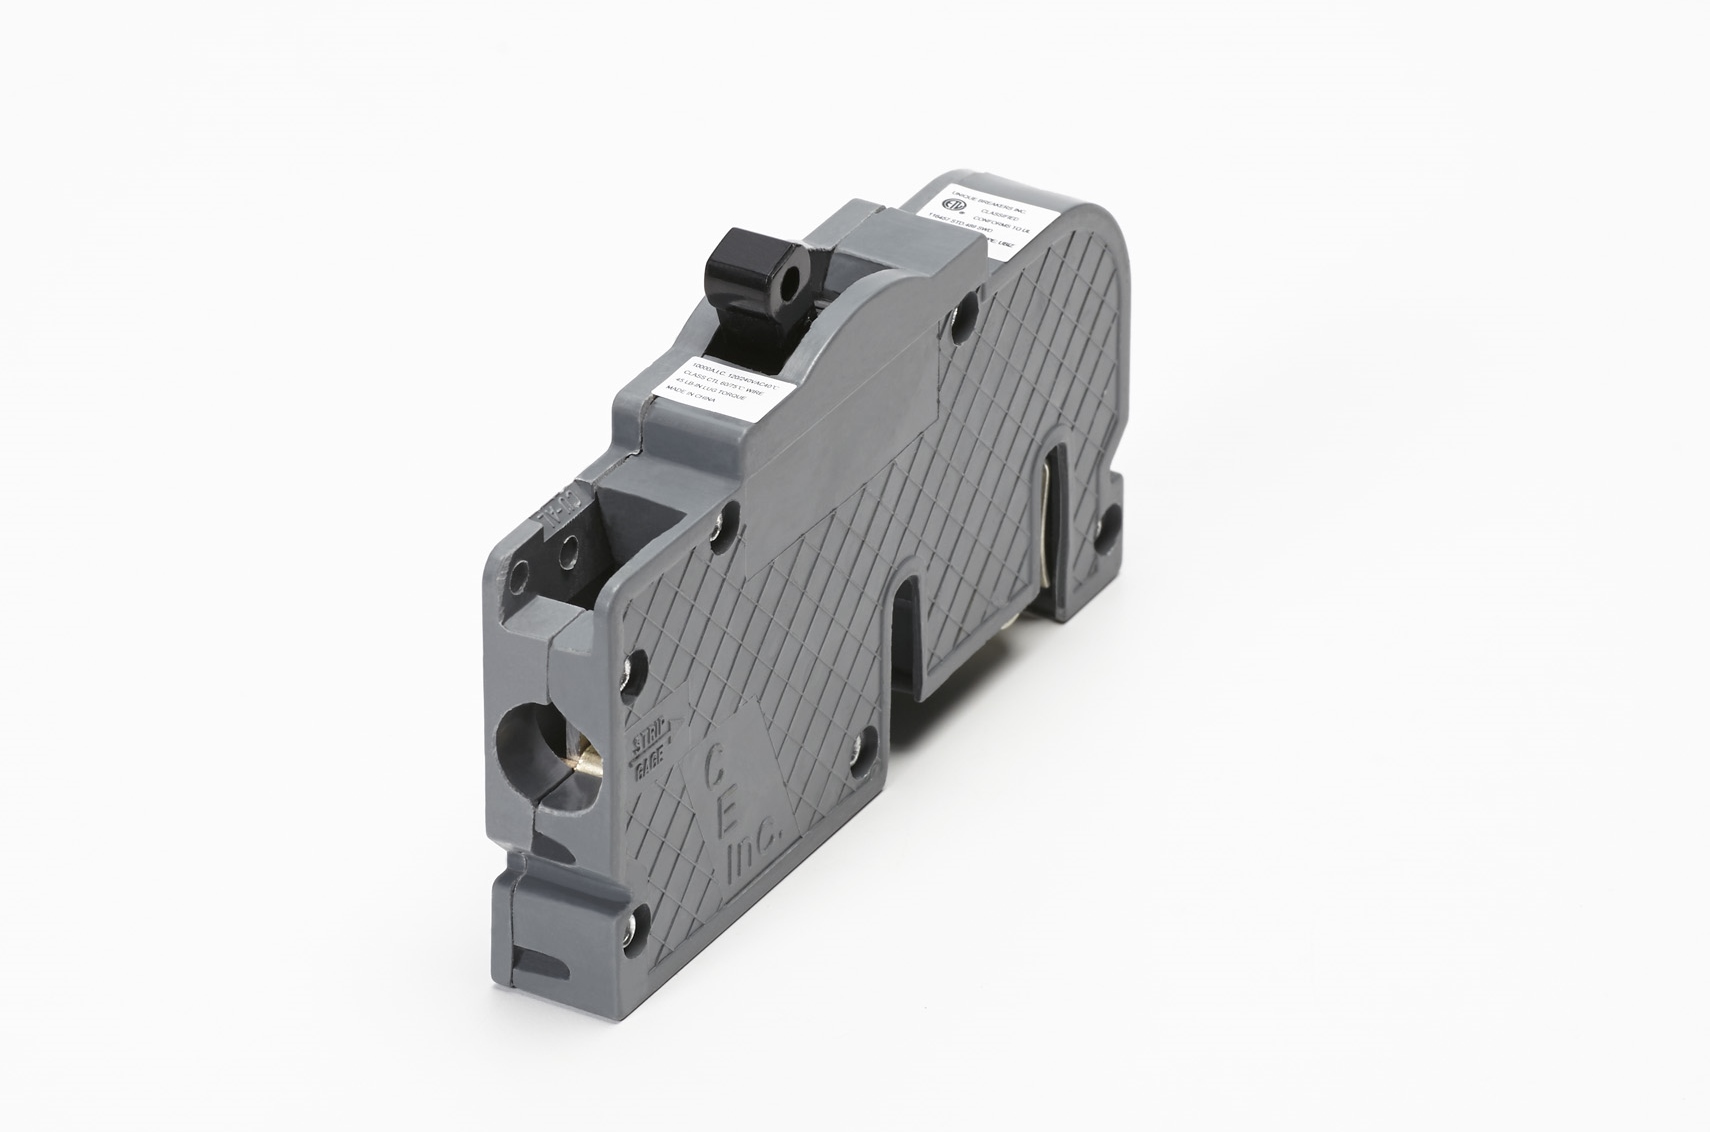 New Zinsco replacement circuit breaker by Connecticut Electric Type UBIZ. For use in Zinsco load centers that accept type Q circuit breakers. ETL Listed. 10,000 AIC 1-pole 15A